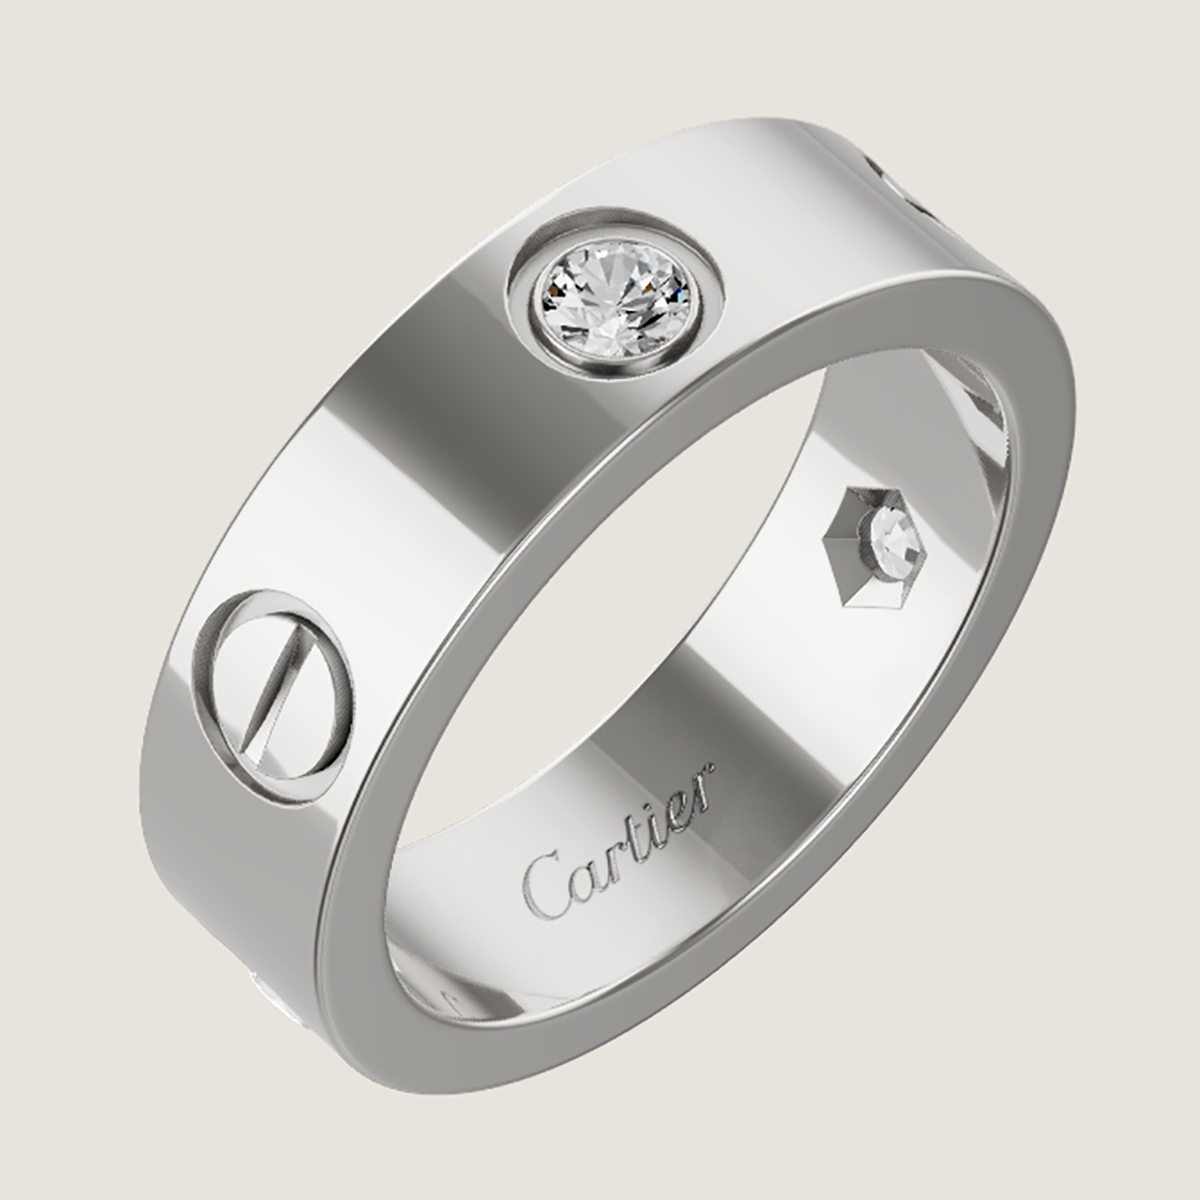 Buy Cartier 1895 Platinum Wedding Band Ring | Solitaire Jewelers –  SOLITAIRE JEWELERS